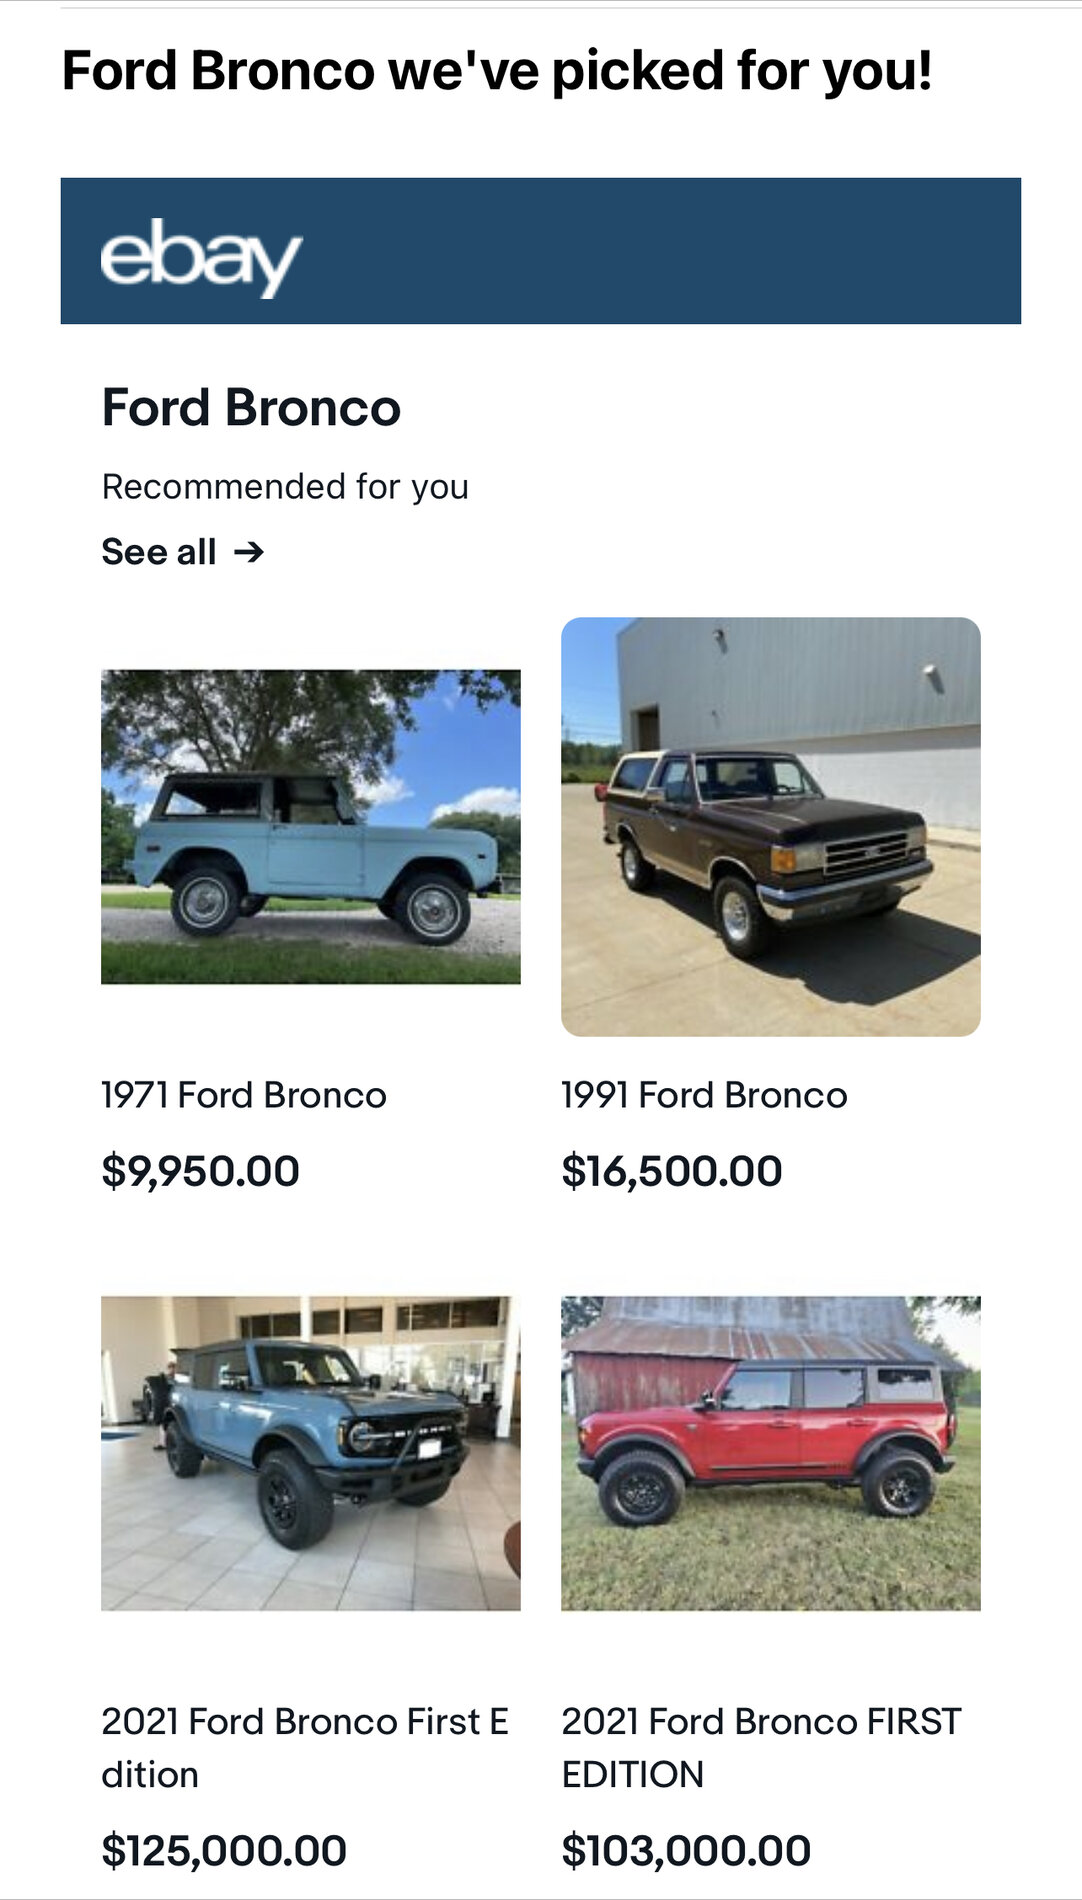 Ford Bronco Delivery delay emails have arrived [8/13] 63168F5E-69DA-4840-A53B-A1F33719600A